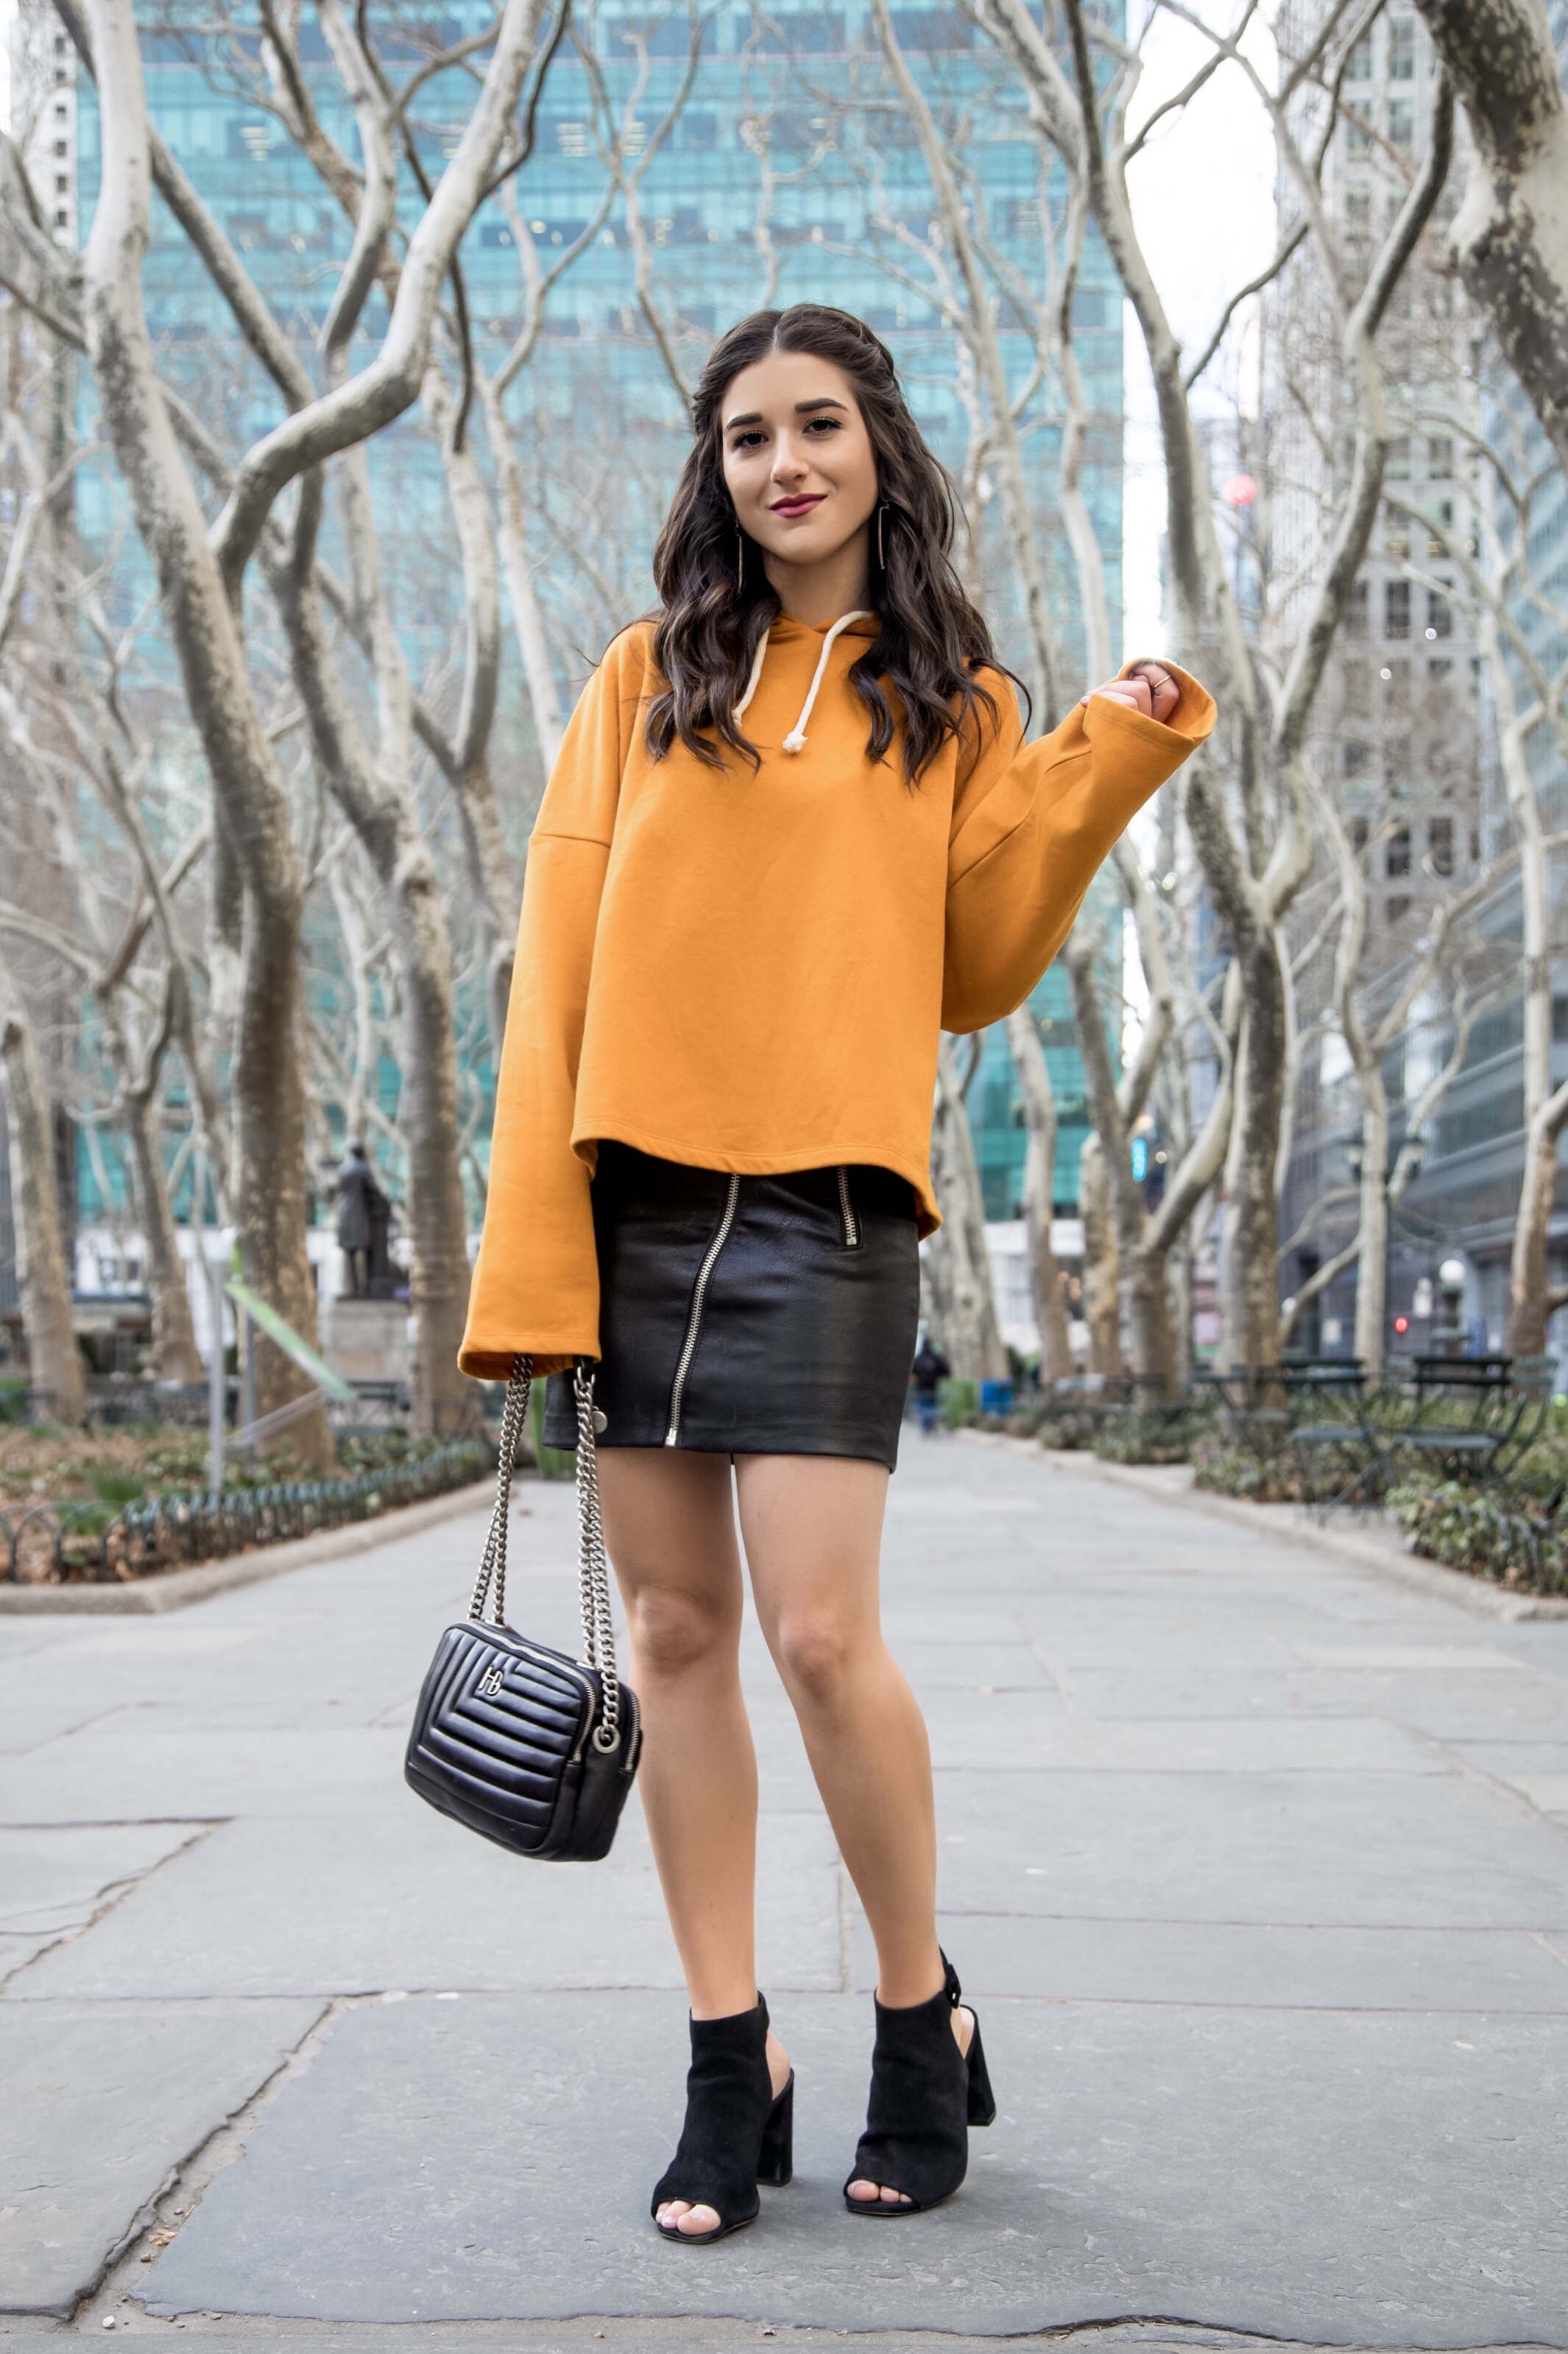 How Blogging Affected My Self Confidence Yellow Sweatshirt Black Pleather Skirt Esther Santer Fashion Blog NYC Street Style Blogger Outfit OOTD Trendy Zara ASOS Hairstyle Sporty Girly Open Toe Booties Shopping  Buy Wear Fall Winter Hood Mustard Color.jpg